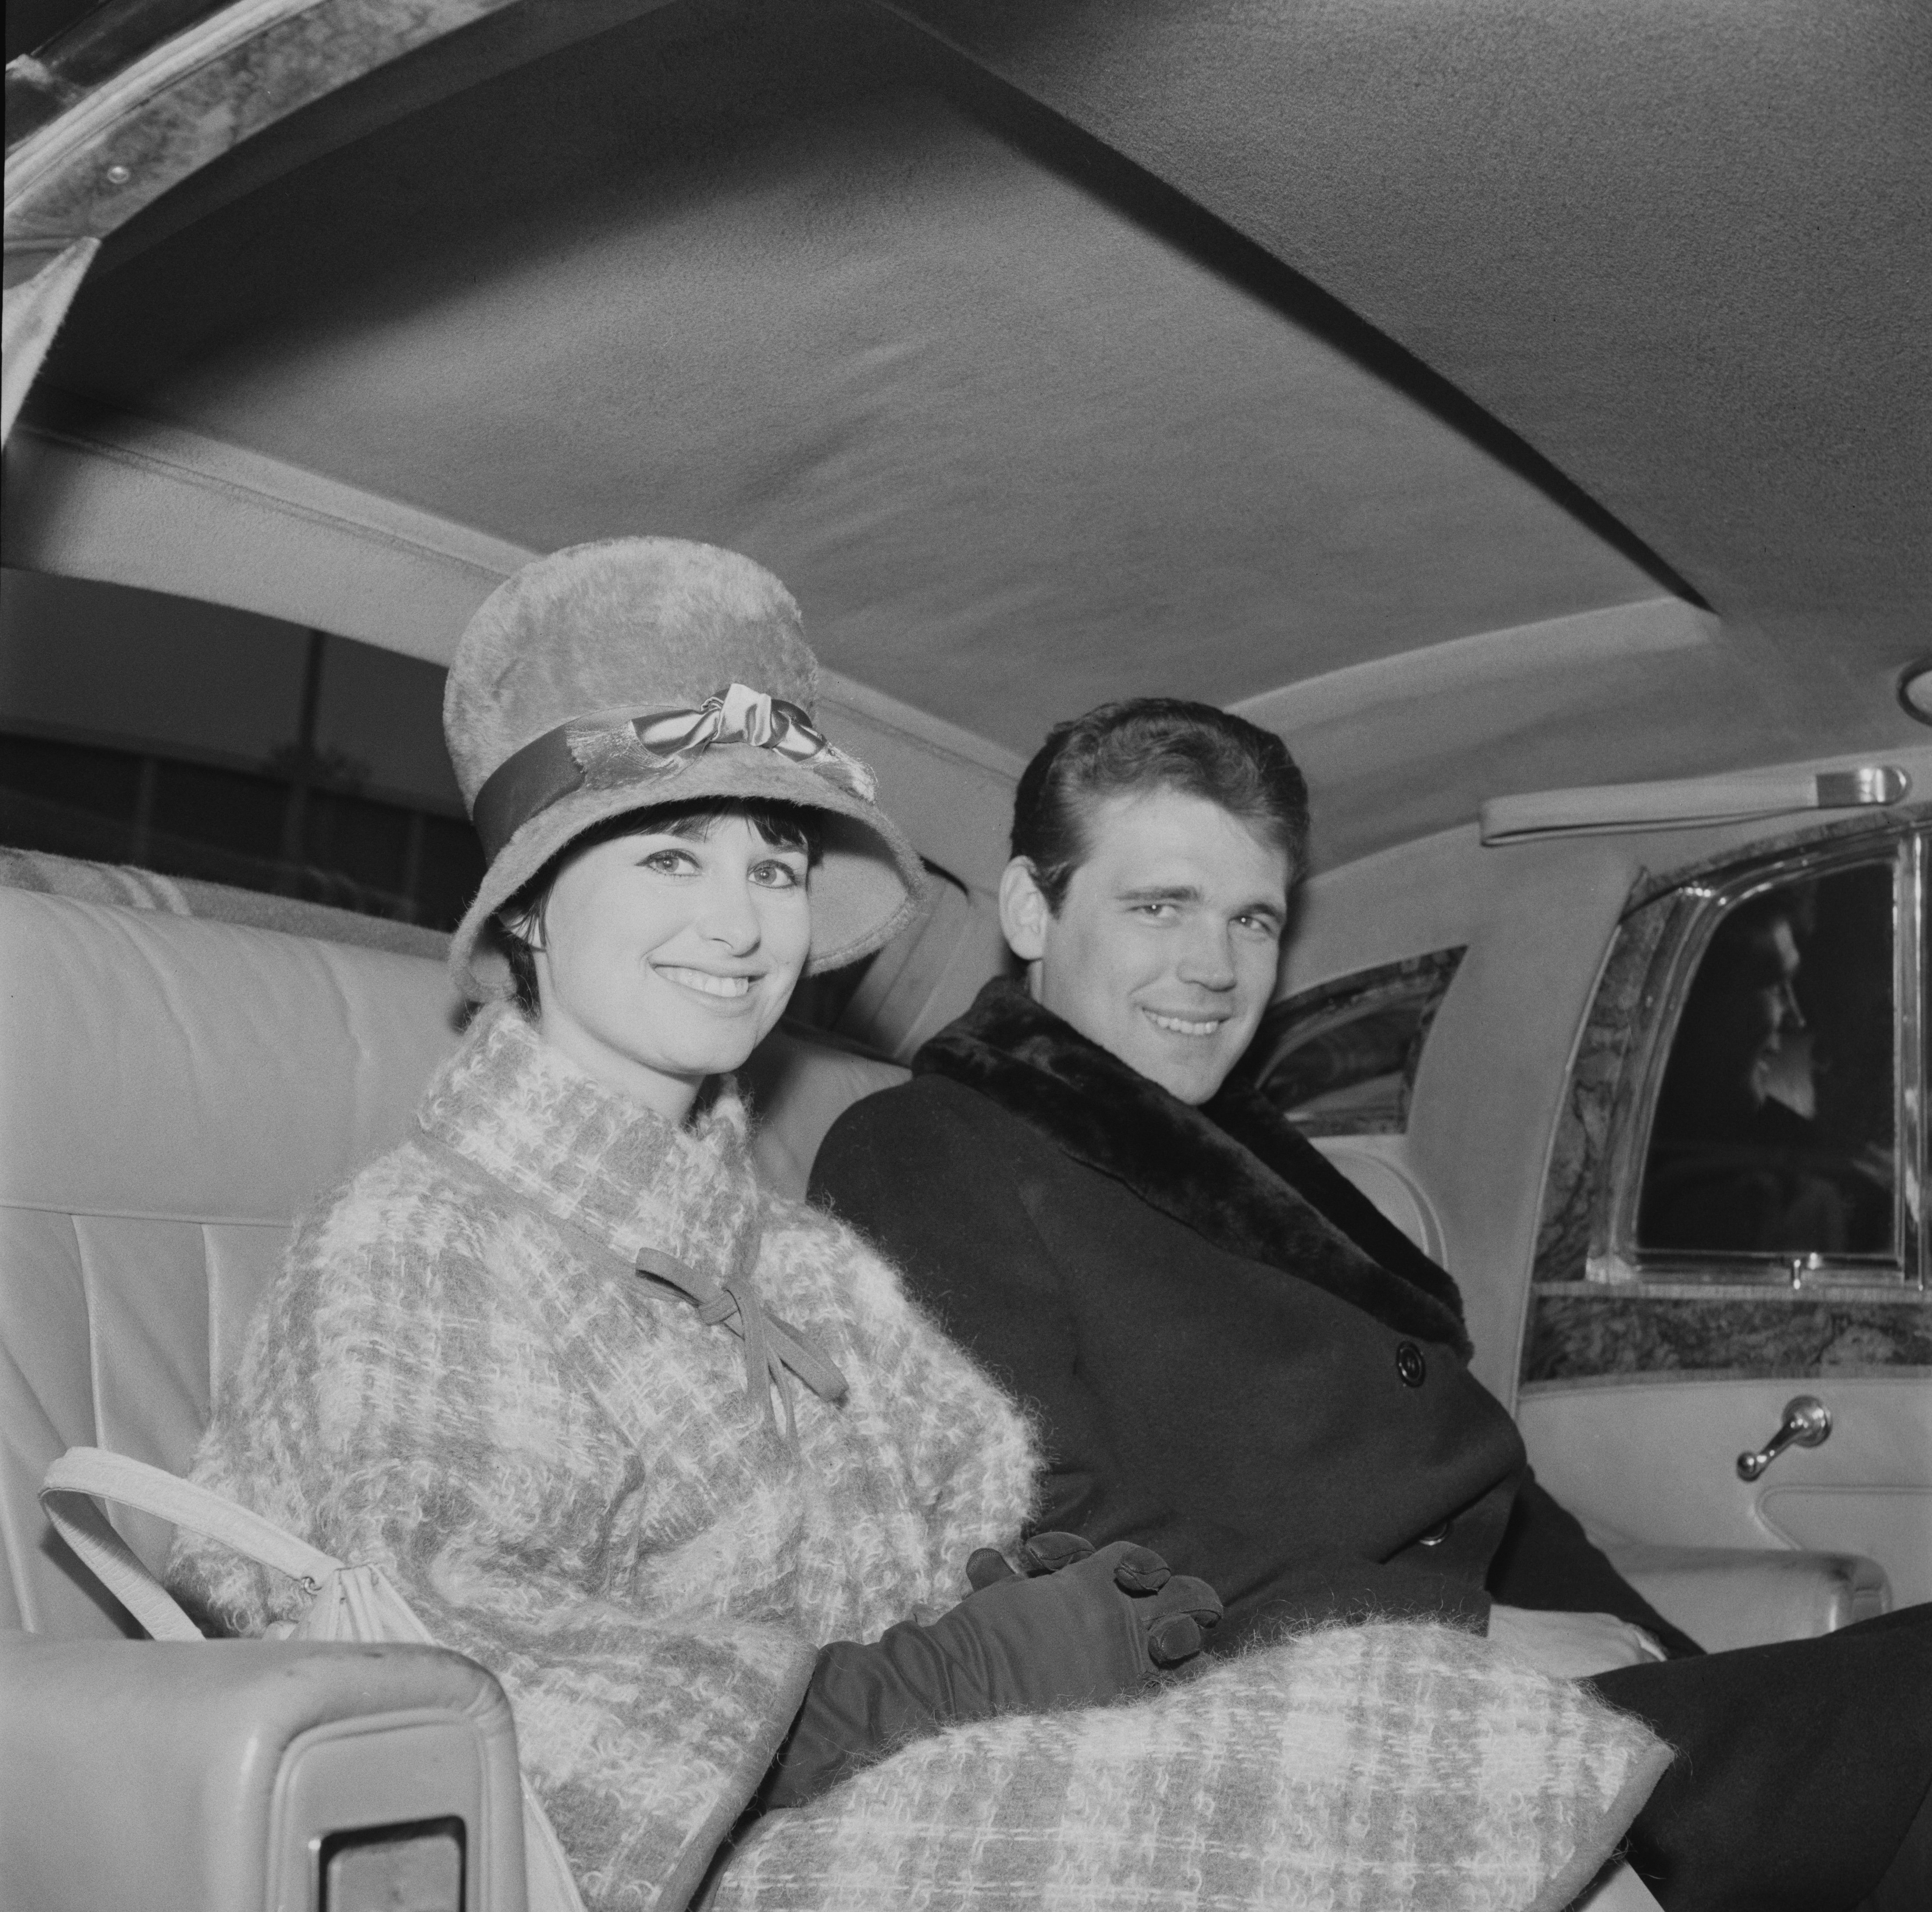 American guitarist Duane Eddy sitting in the back seats of a car with his wife Jessi Colter, UK, 11th November 1963 | Source: Getty Images 